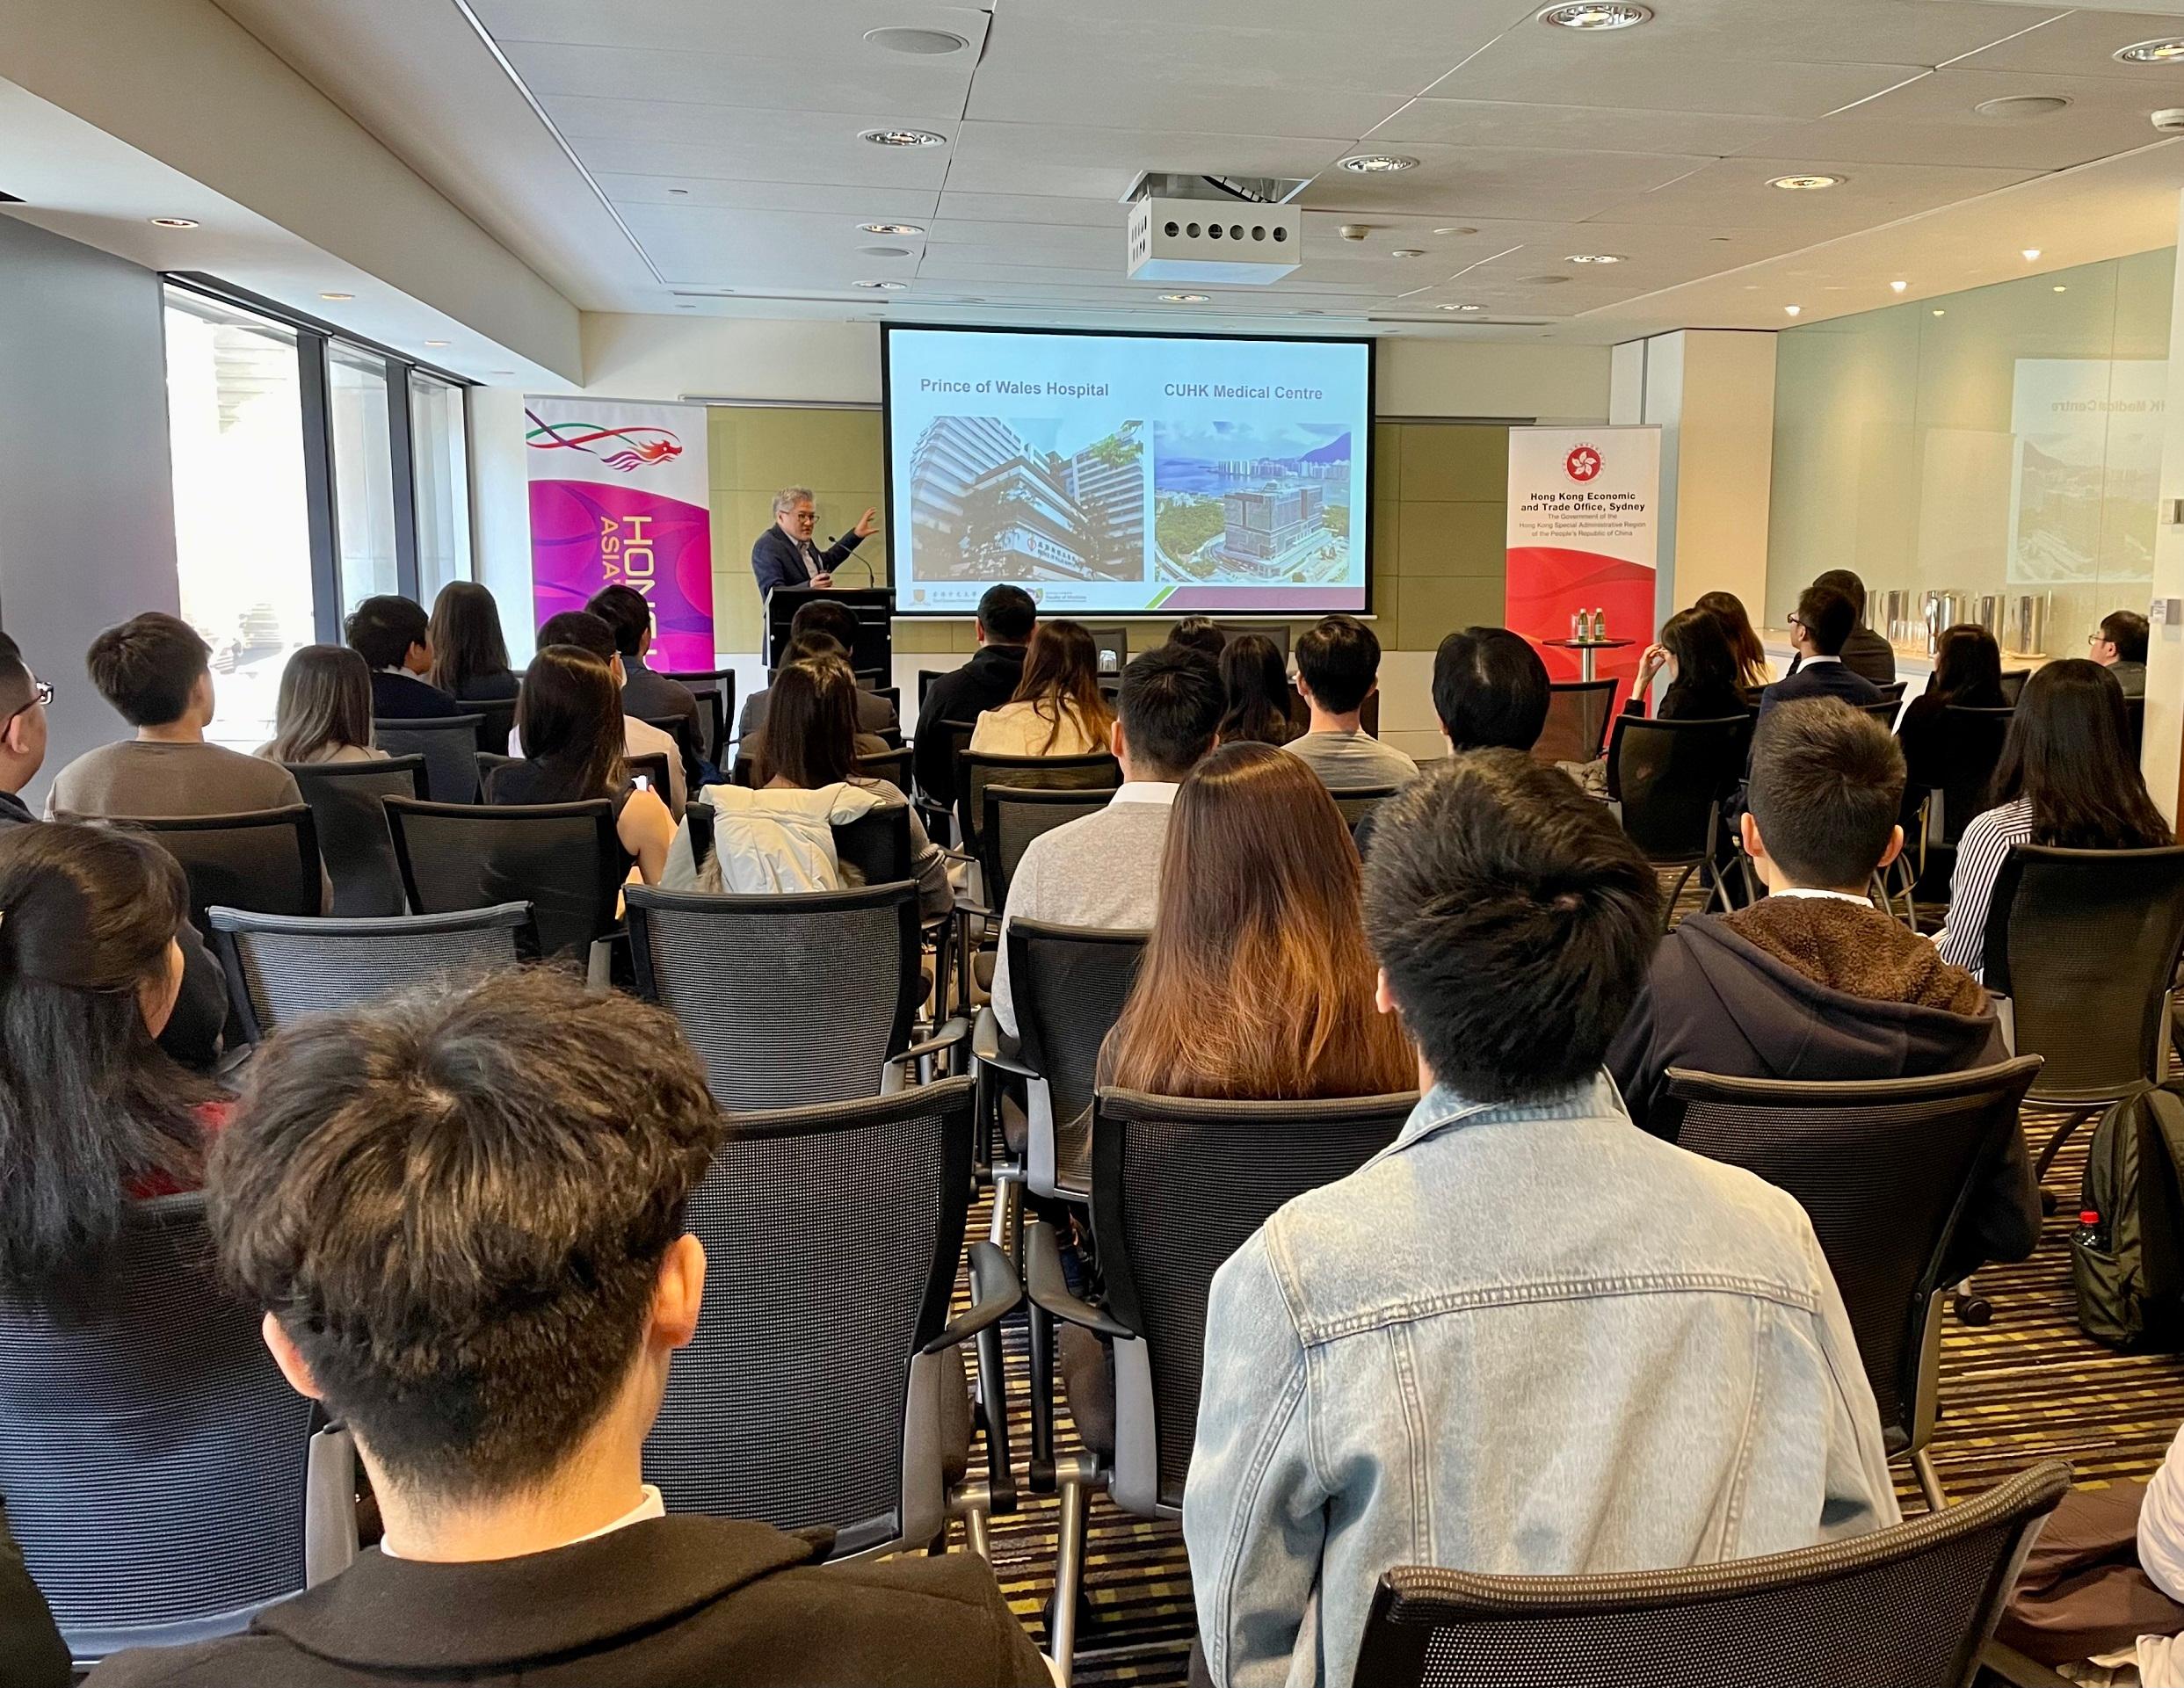 Assistant Dean (External Affairs) of the Faculty of Medicine of the Chinese University of Hong Kong, Professor Bryan Yan, promotes the working opportunities and prospects for non-locally trained doctors in Hong Kong at the Recruitment Day held in Sydney, Australia today (June 3).